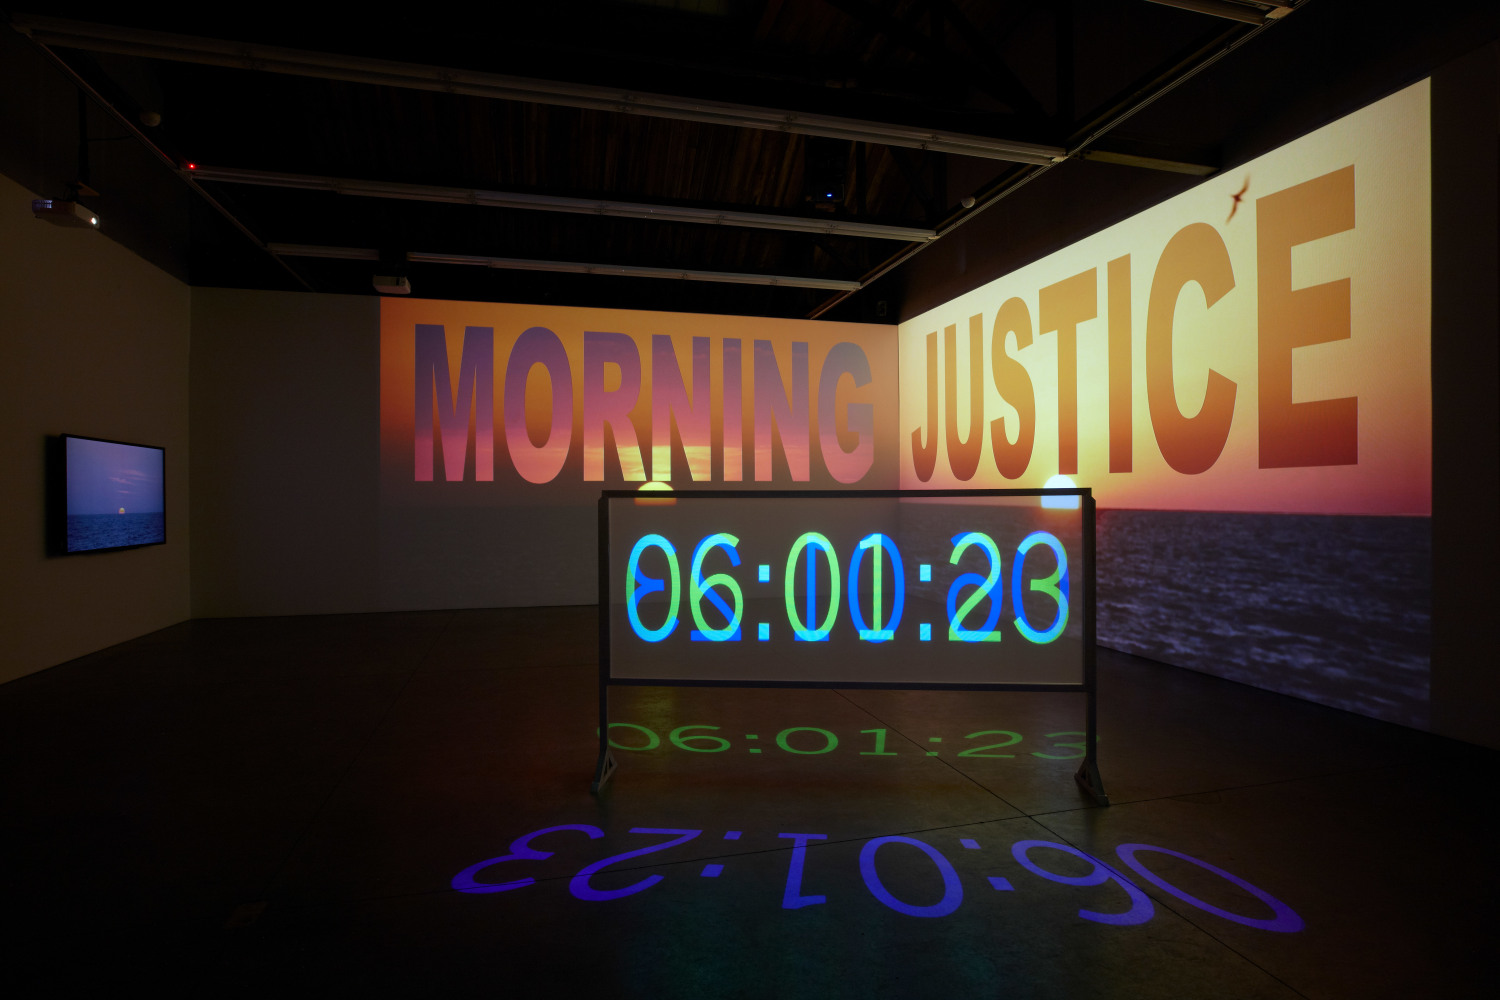 Charles Atlas
The Waning of Justice, 2015
Multi-channel video installation with sound
Duration: 23 minutes, 44 seconds
Edition of 5 plus 2 artist&amp;#39;s proof